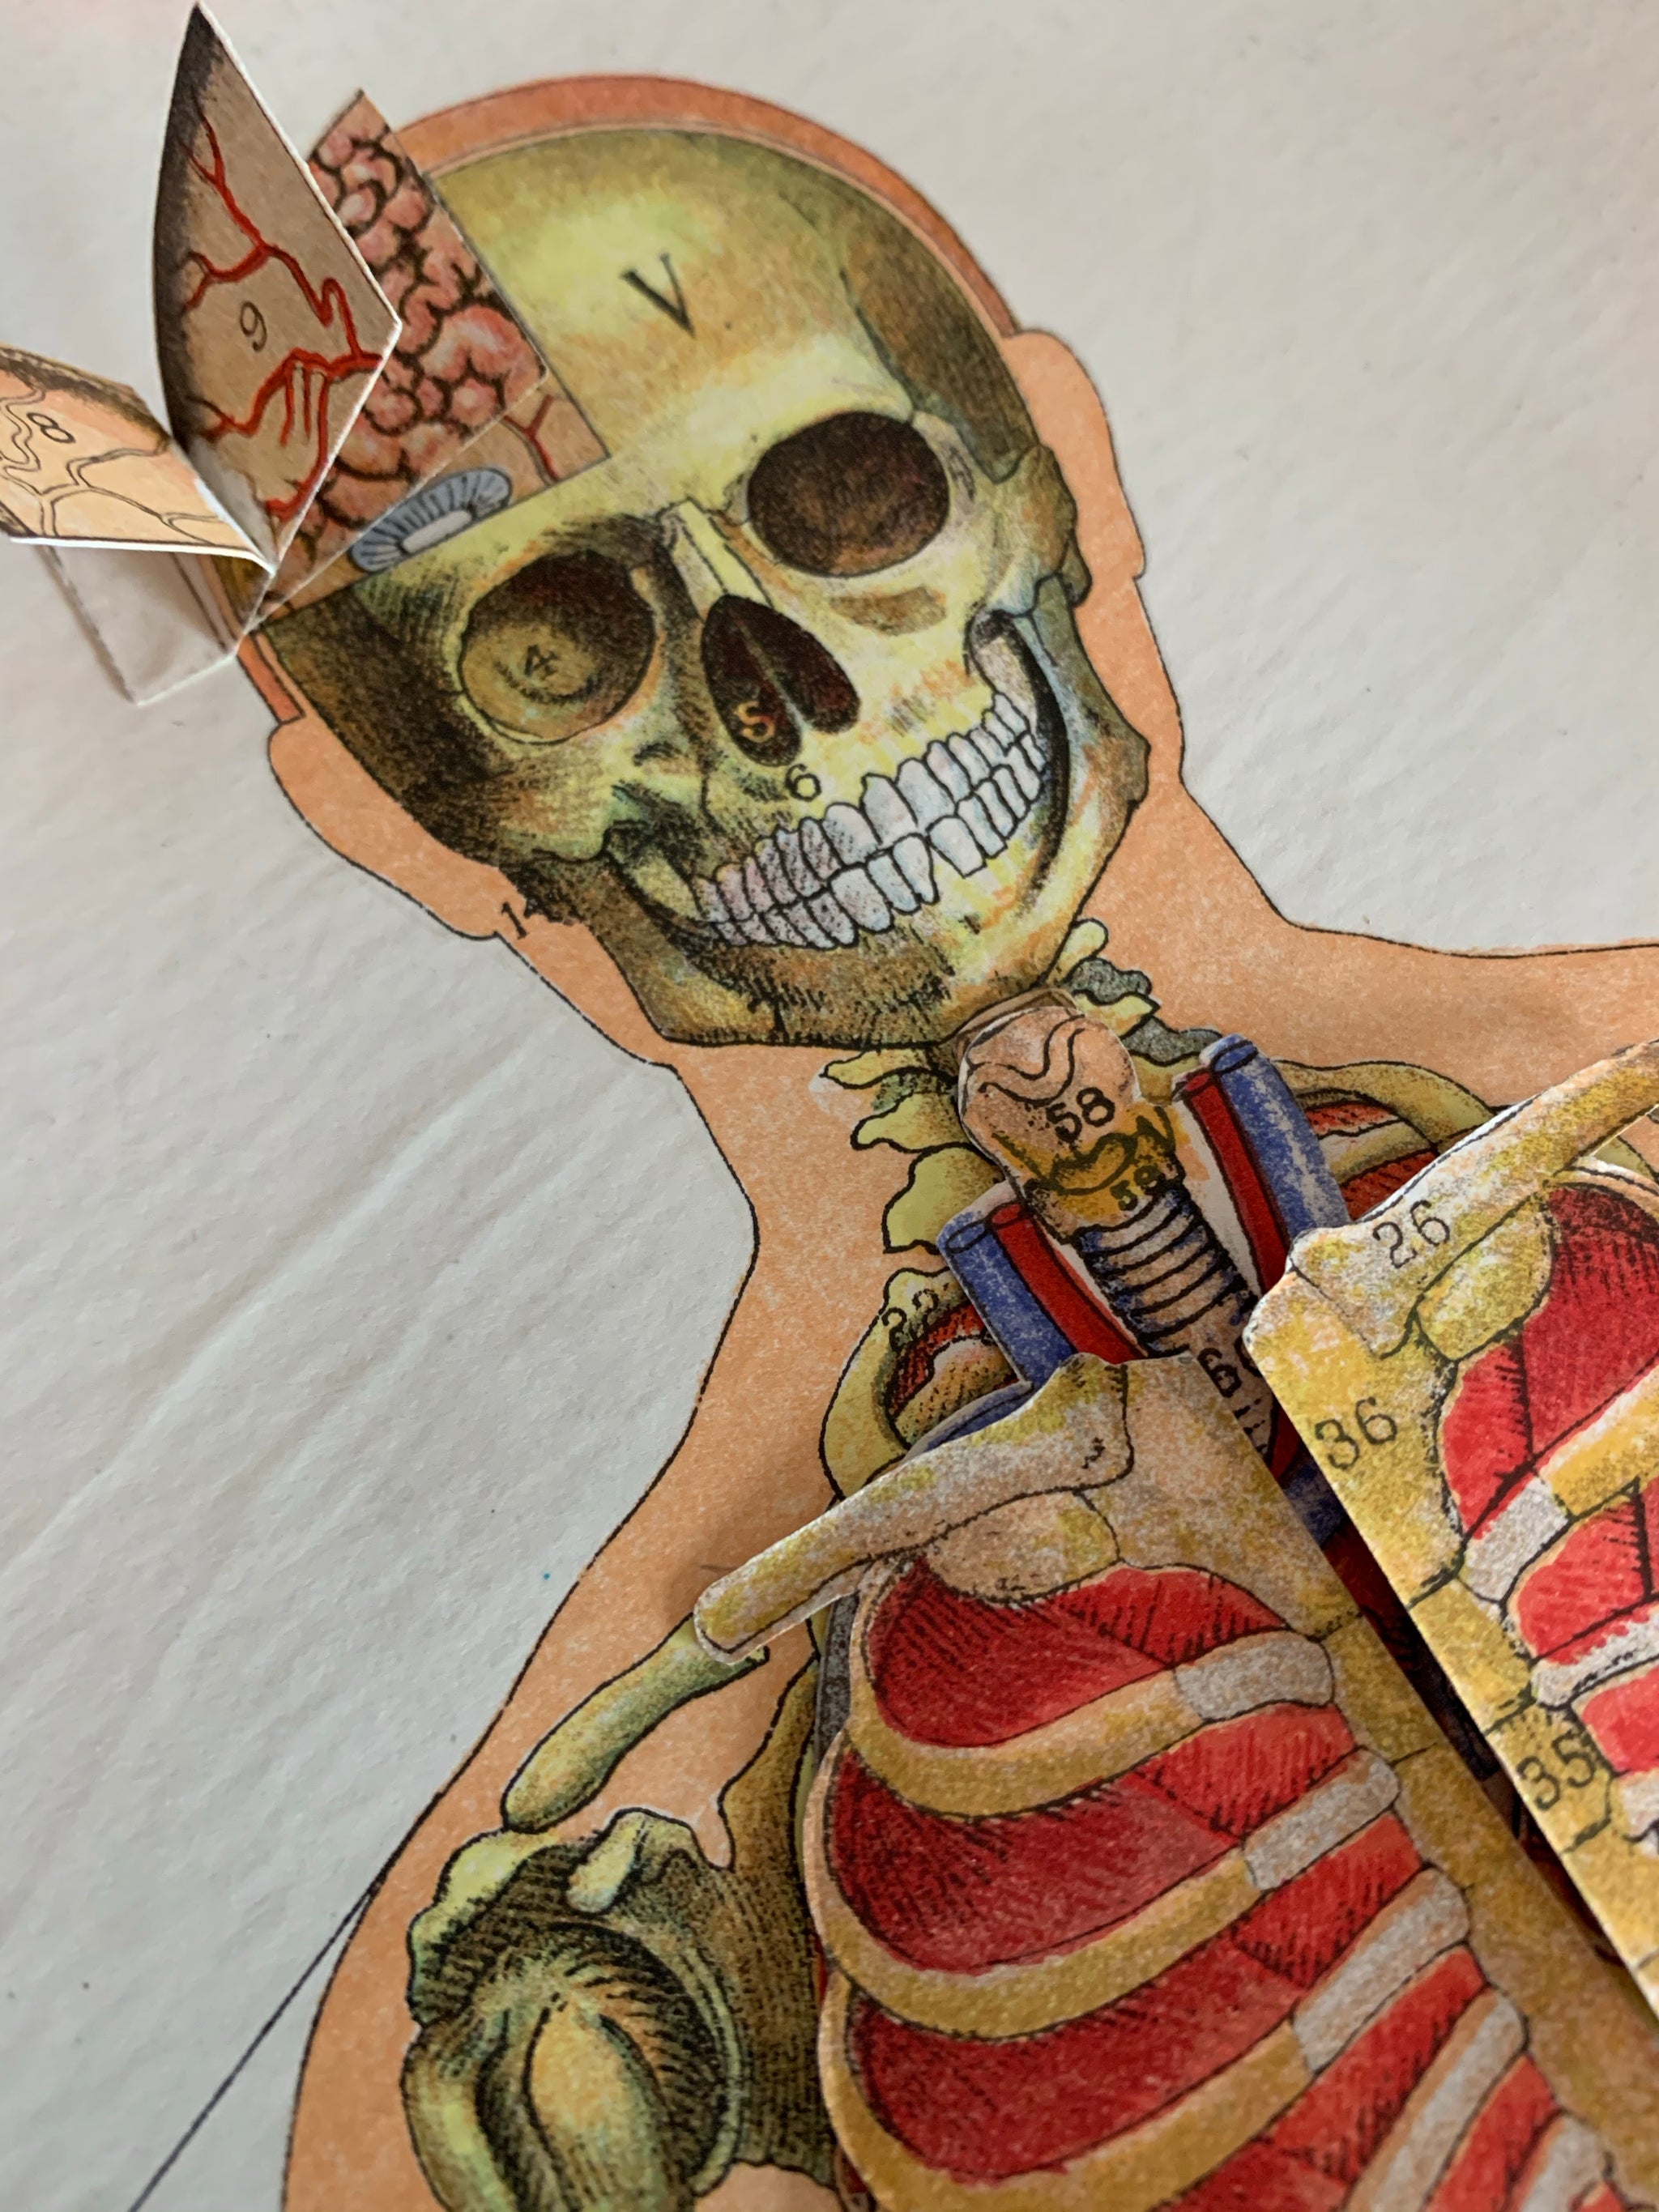 A rare pair of anatomical books: Philips Model Manikin of the human bo -  Belle and Beast Emporium